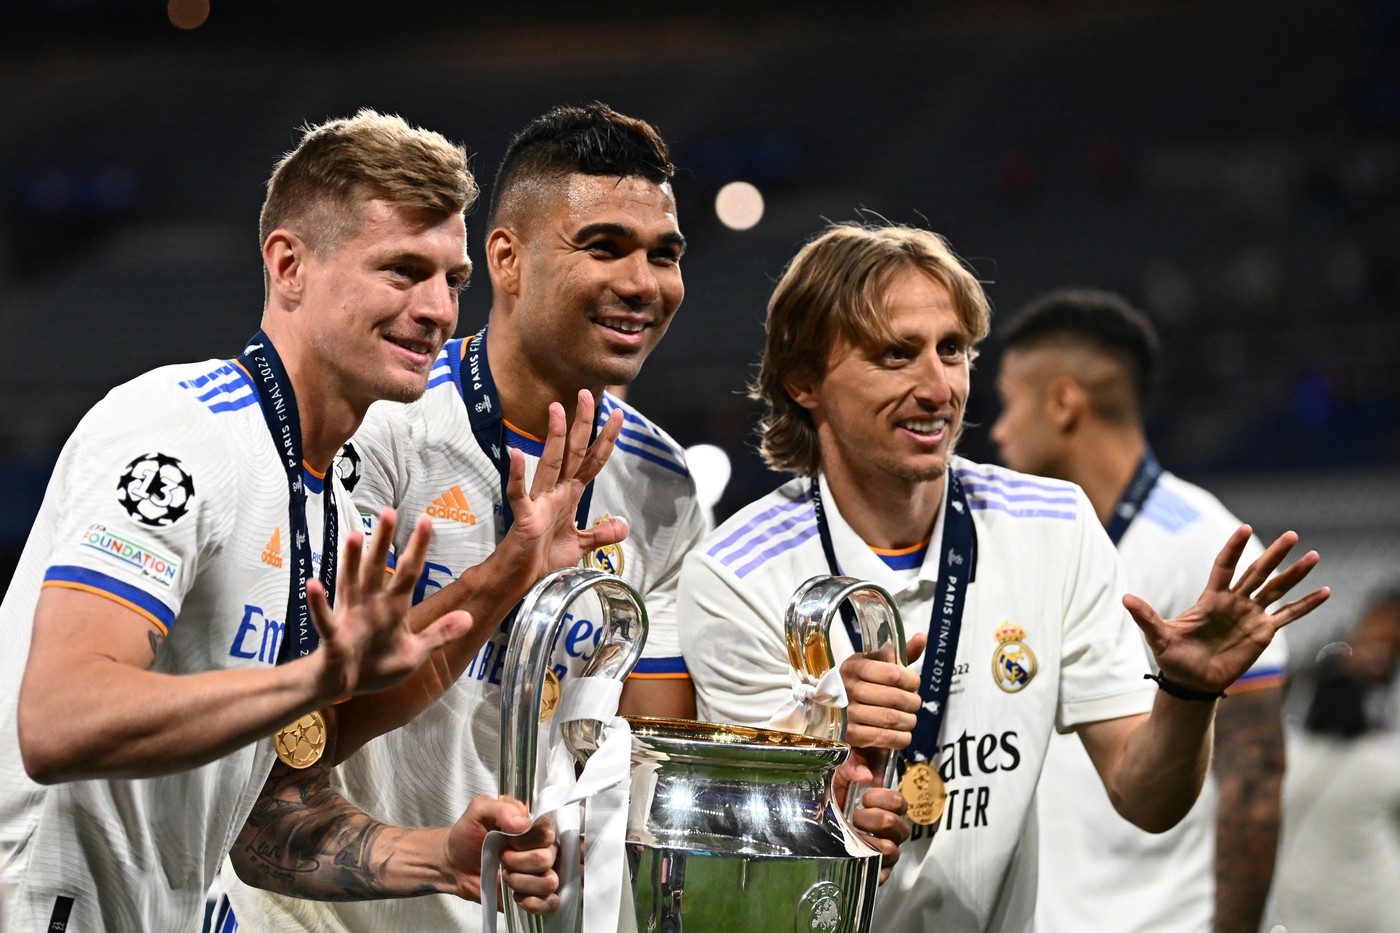 (From L) Real Madrid's German midfielder Toni Kroos, Real Madrid's Brazilian midfielder Casemiro and Real Madrid's Croatian midfielder Luka Modric pose with the trophy after winning the UEFA Champions League final football match between Liverpool and Real Madrid at the Stade de France in Saint-Denis, north of Paris, on May 28, 2022.,Image: 695348995, License: Rights-managed, Restrictions: , Model Release: no, Credit line: Anne-Christine POUJOULAT / AFP / Profimedia